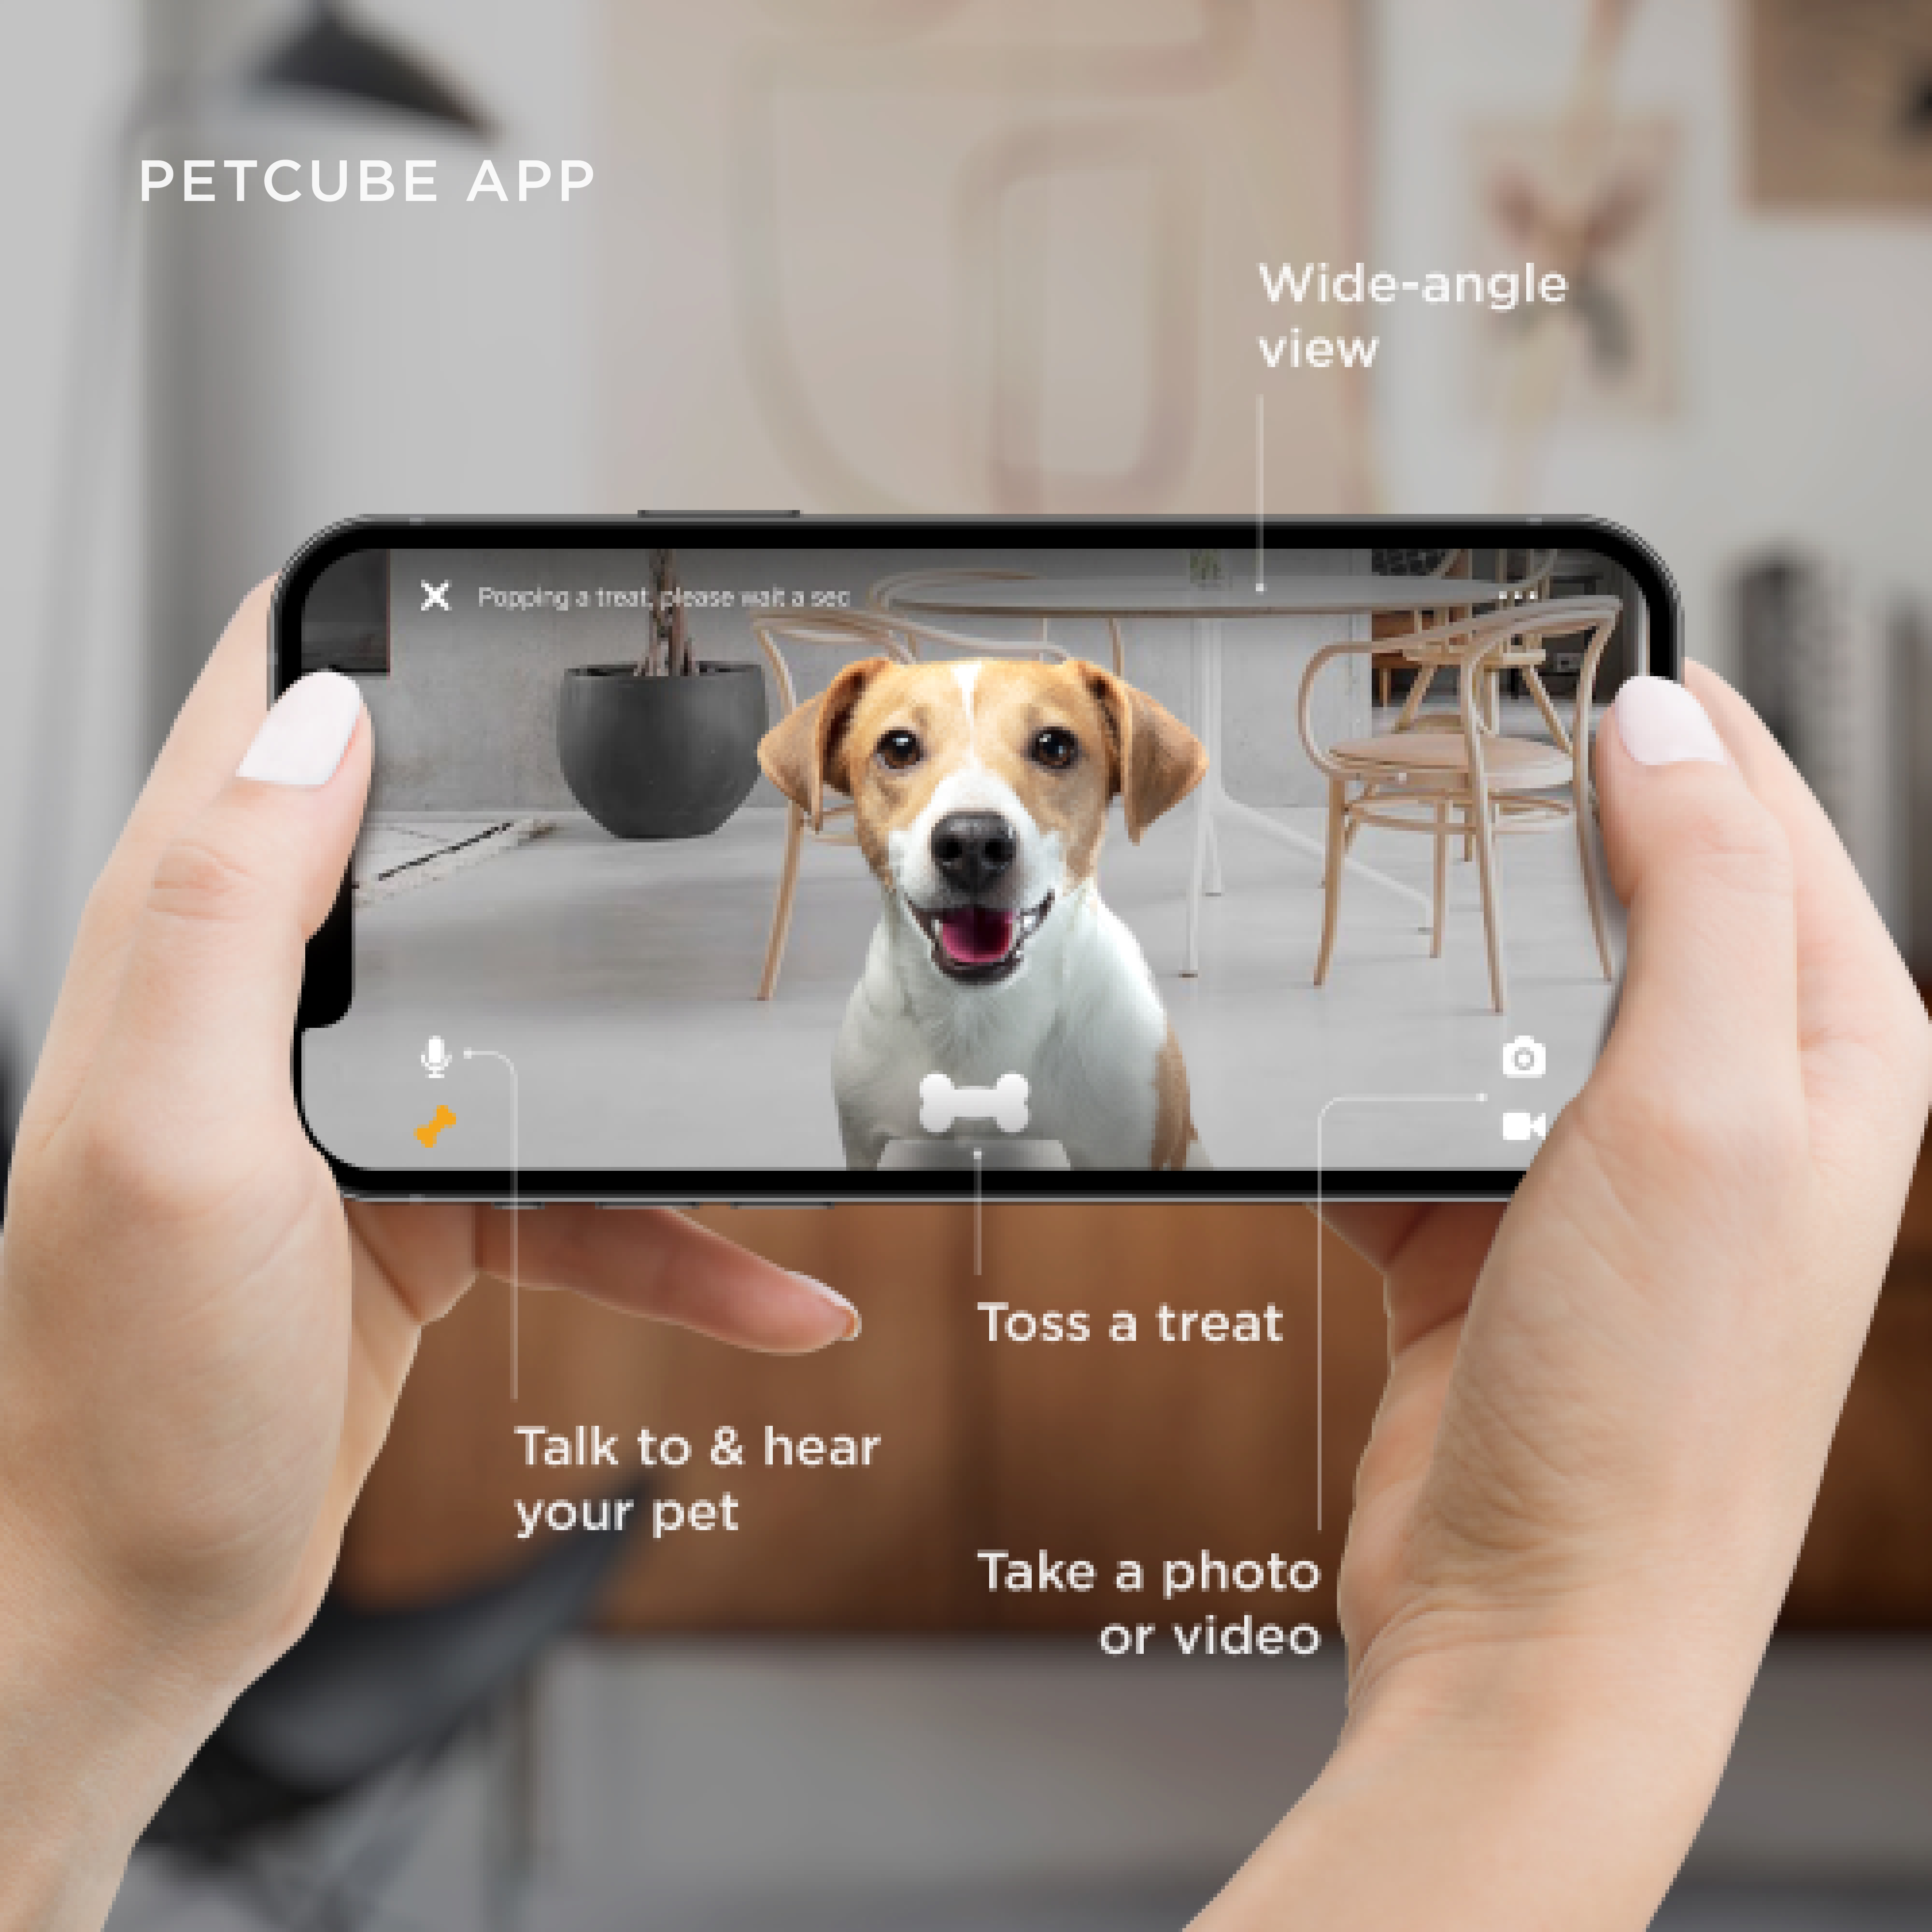 Petcube Bites 2 Lite - Interactive Pet Camera with Treat Dispenser, 1080p HD Video, Night Vision, Two-Way Audio - image 2 of 5